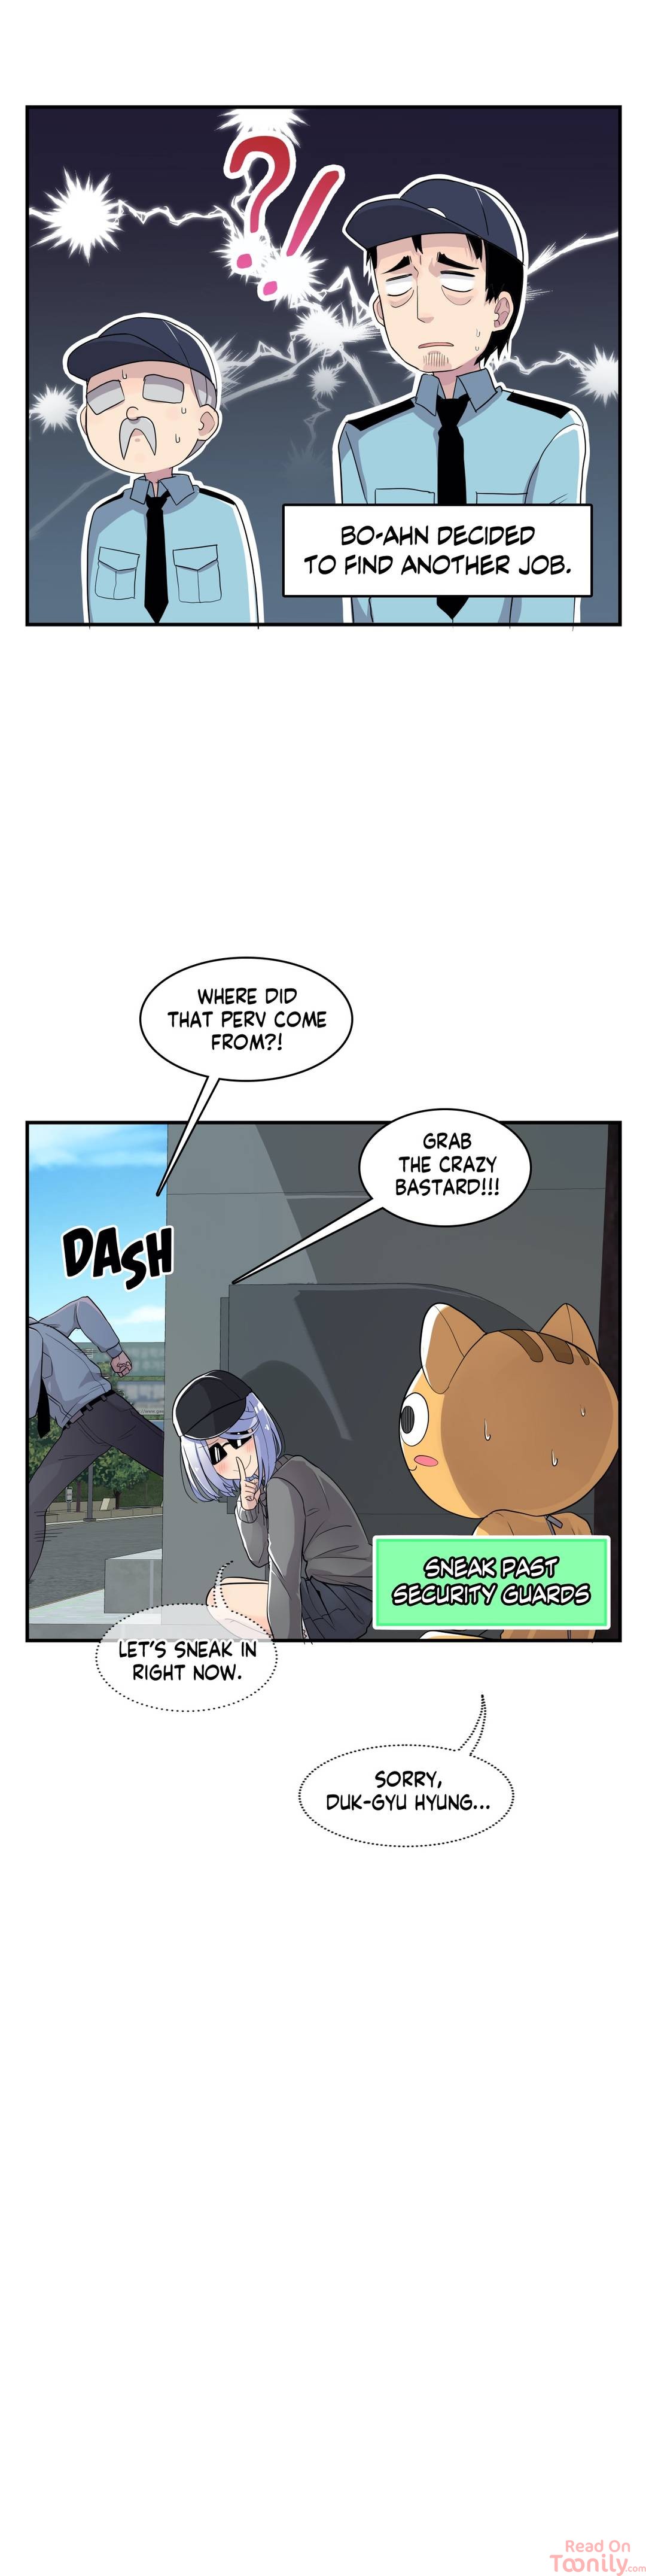 Rom-comixxx! - Chapter 12 Page 11